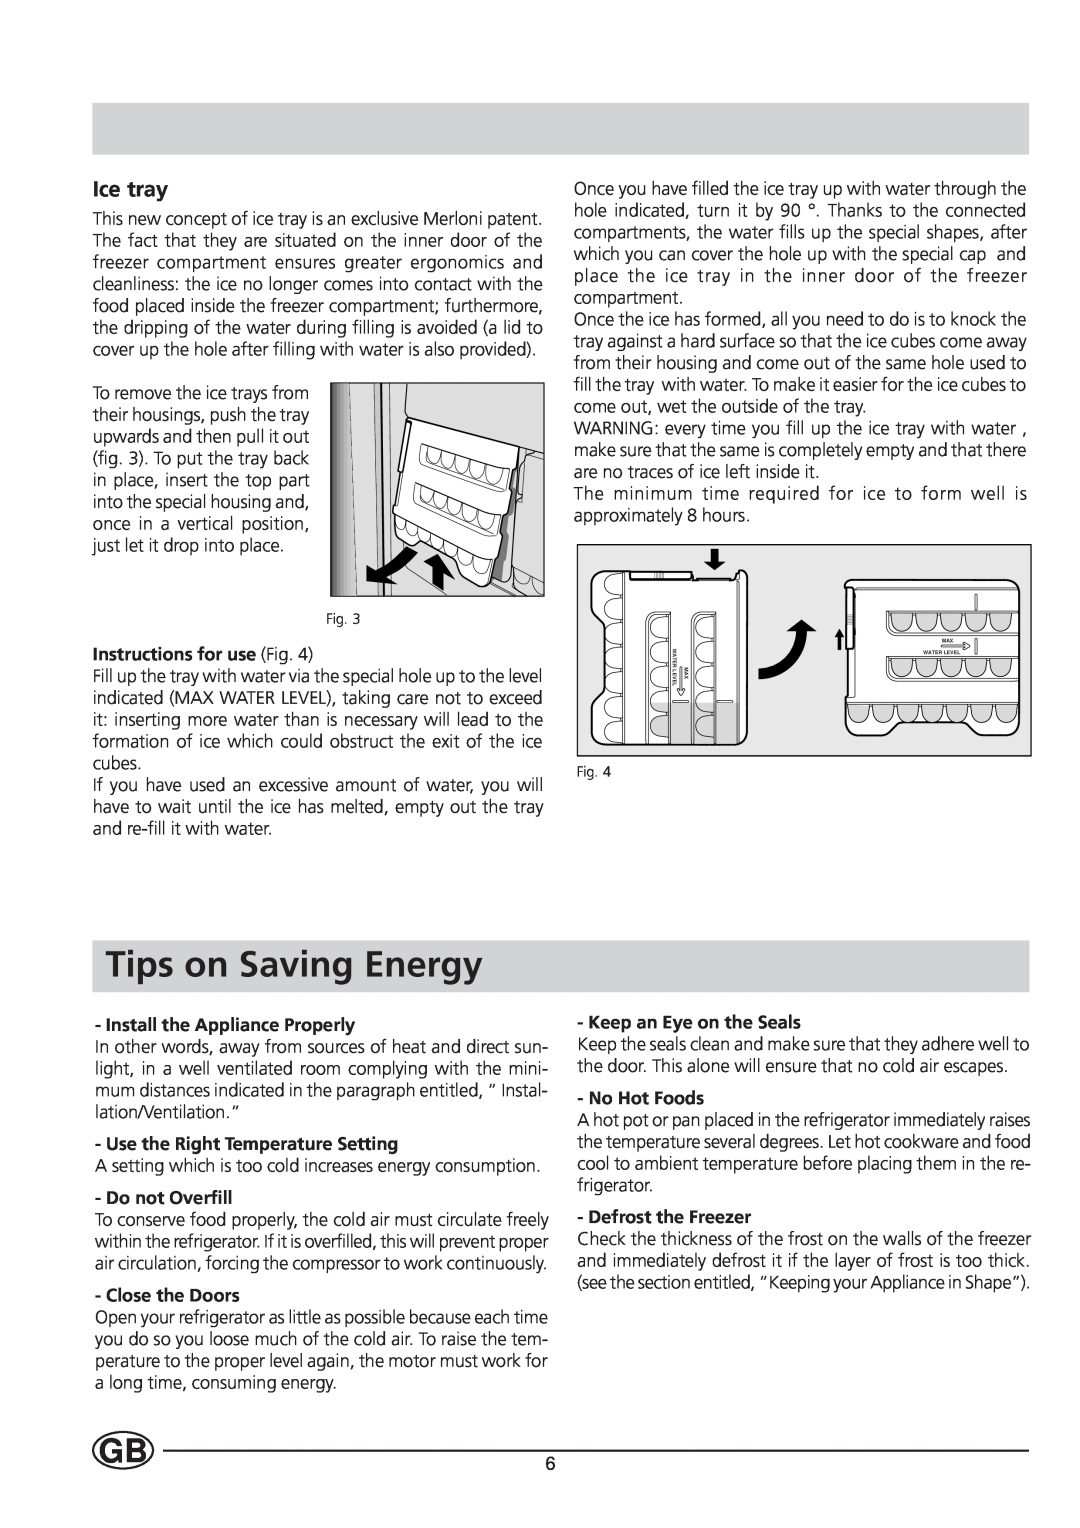 Indesit TA5-TA5S Tips on Saving Energy, Ice tray, Instructions for use Fig, Install the Appliance Properly, No Hot Foods 